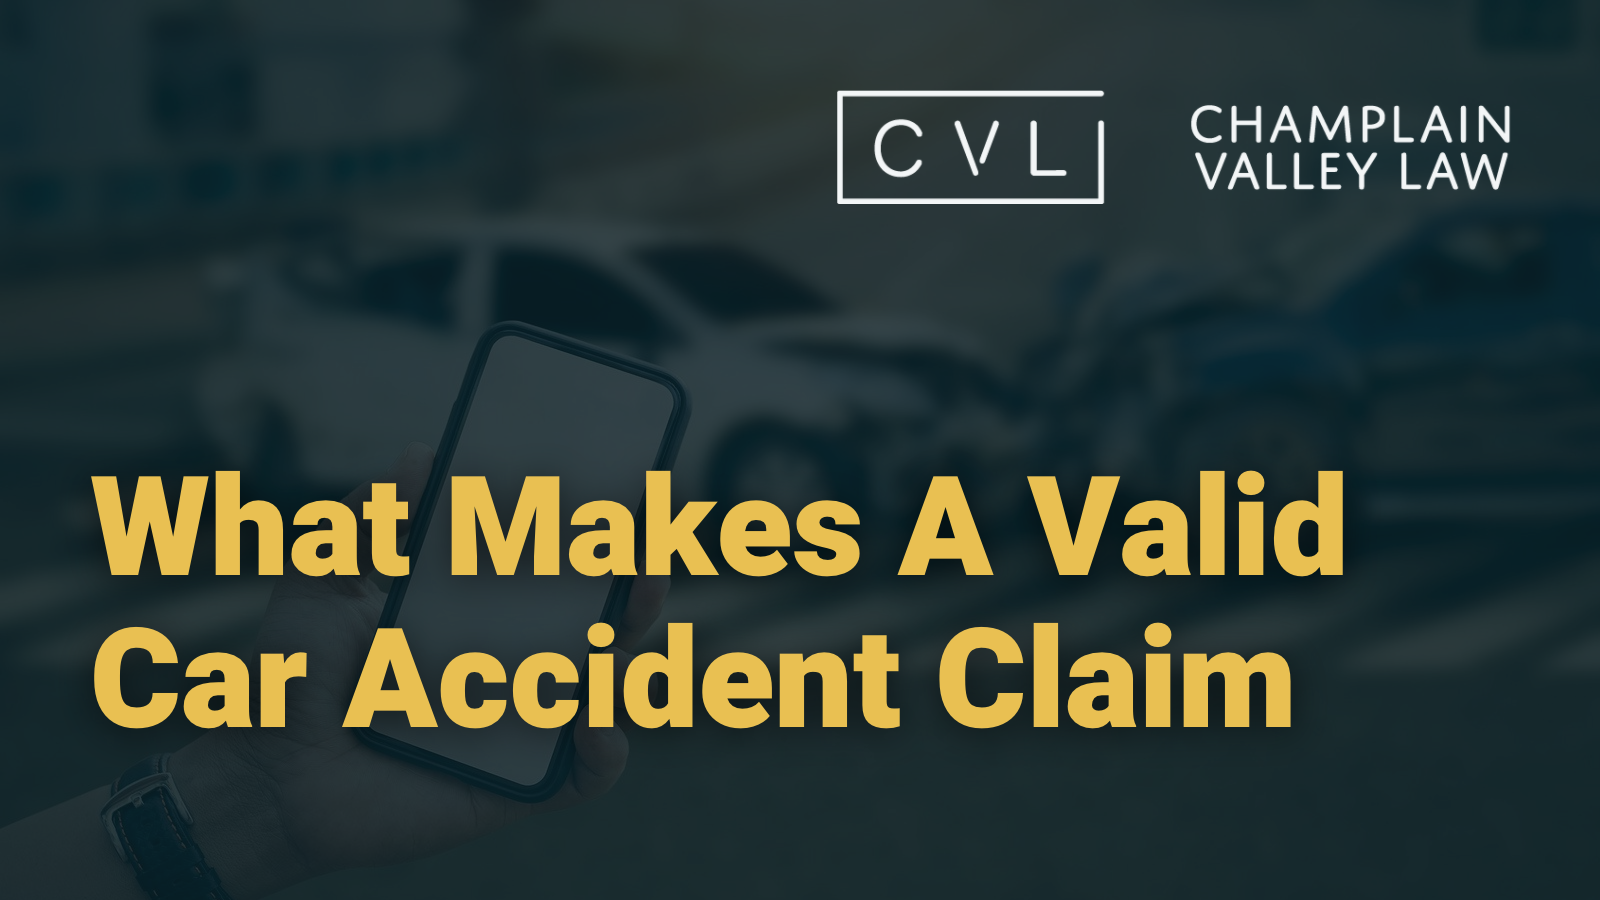 What Makes A Valid Car Accident Claim in vermont - Champlain Valley Law - Attorney Drew Palcsik